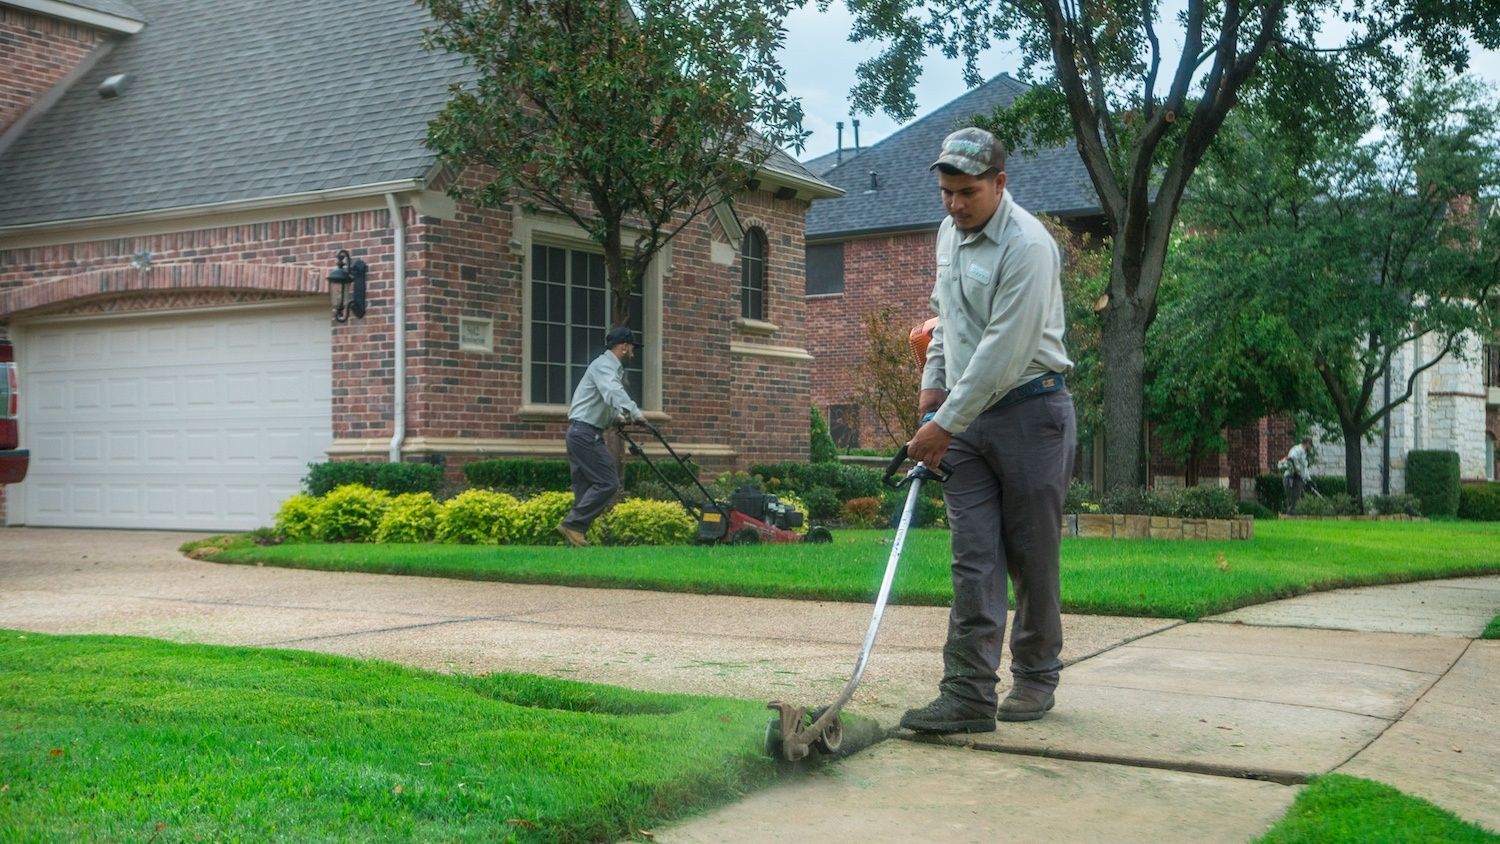 Looking For A Landscaping Job That, Landscaping Jobs In Texas